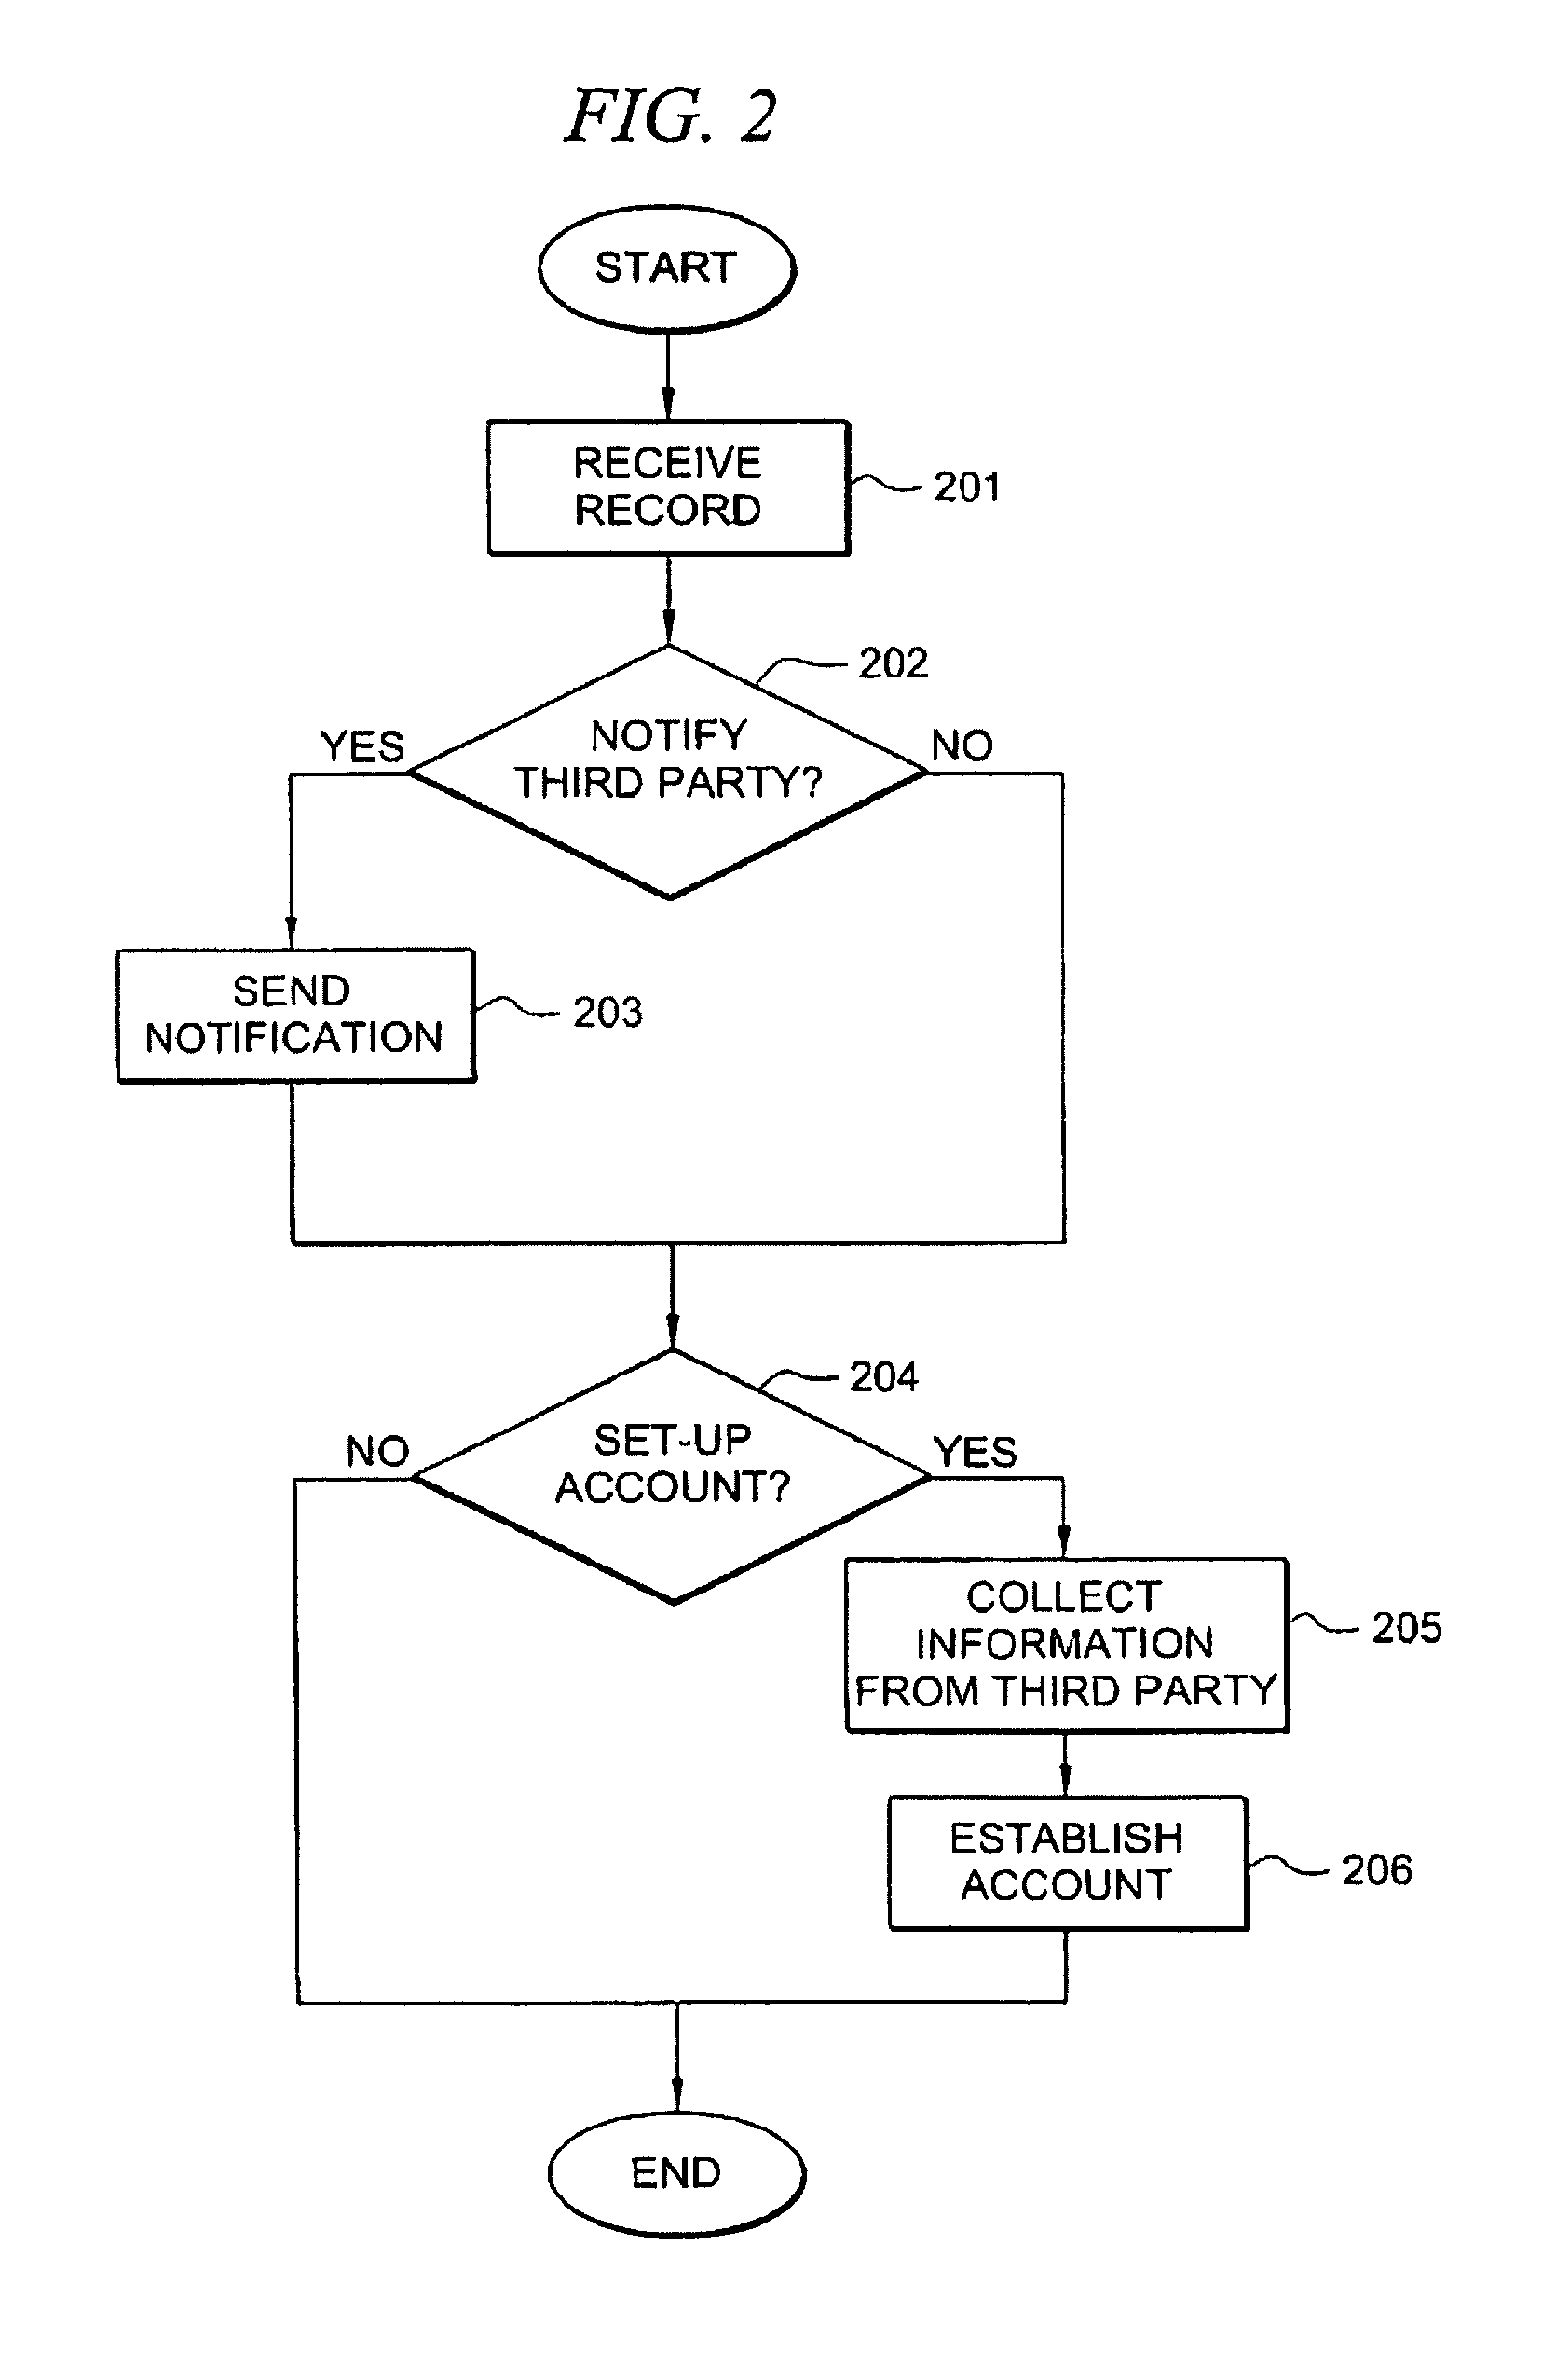 Inmate management and call processing systems and methods